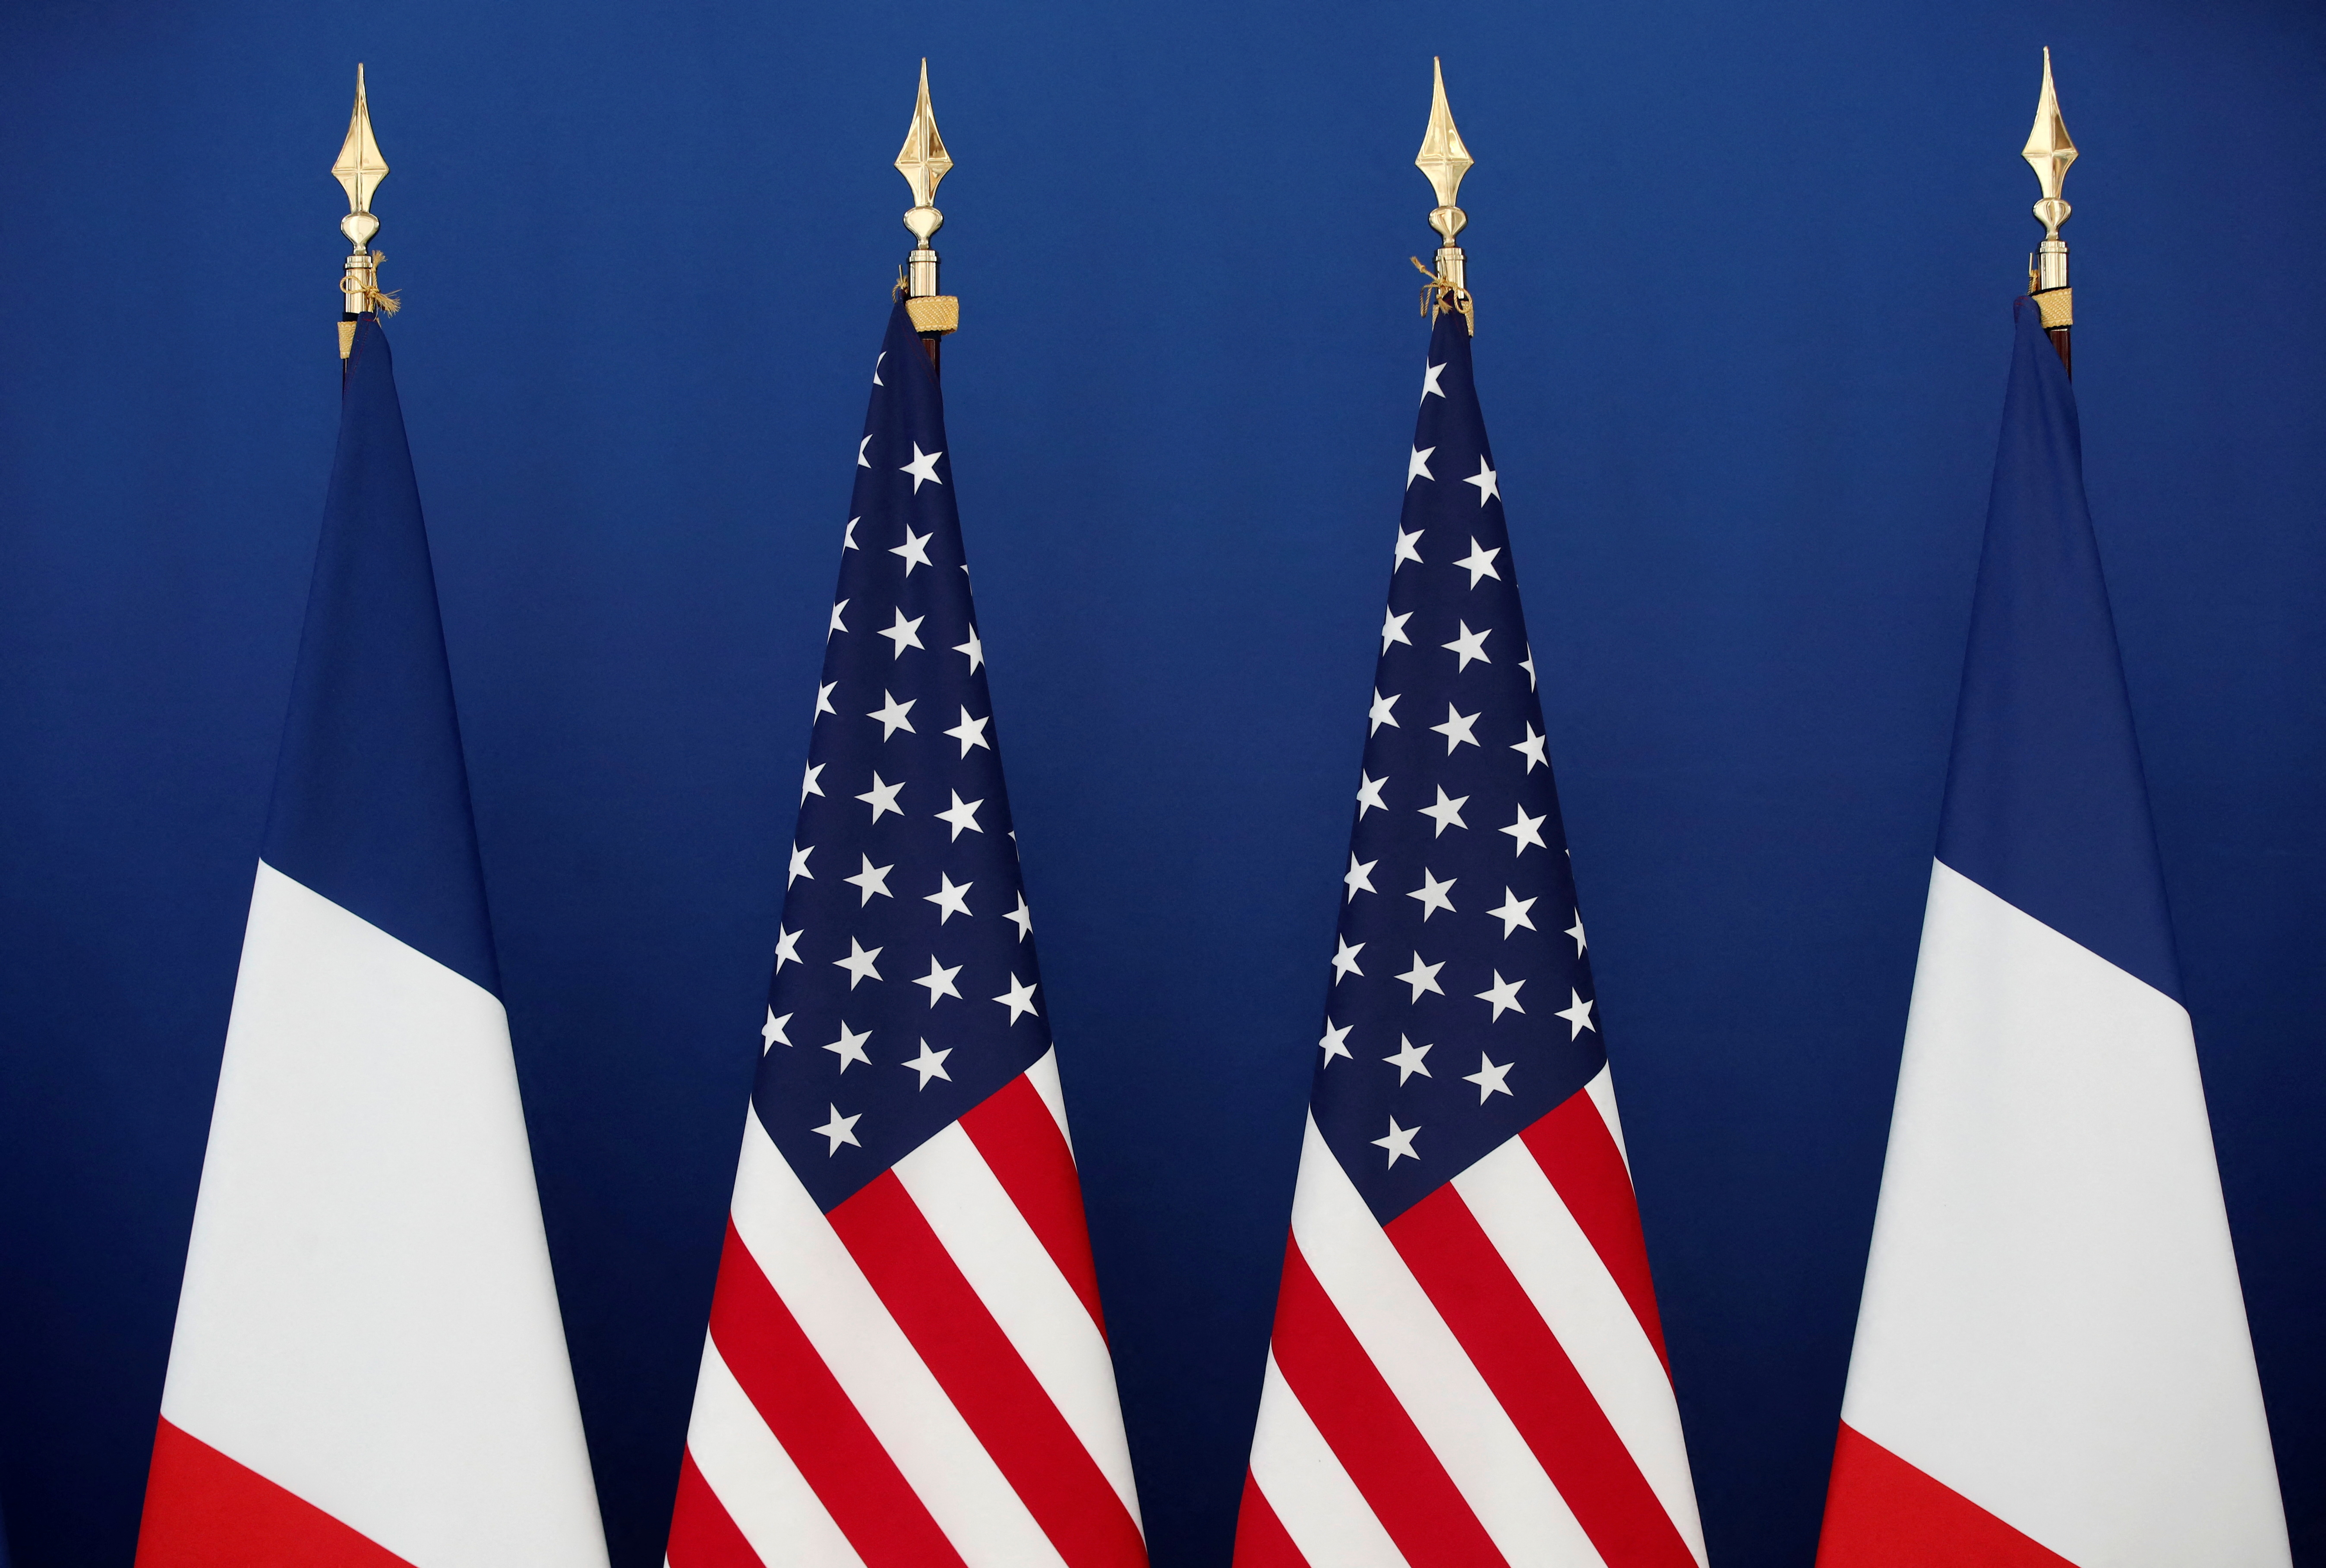 French and U.S. flags are seen ahead of the meeting of French Economy and Finance Minister Bruno Le Maire and US Special Presidential Envoy for Climate John Kerry at the Bercy Finance Ministry in Paris, France, March 10, 2021. REUTERS/Benoit Tessier